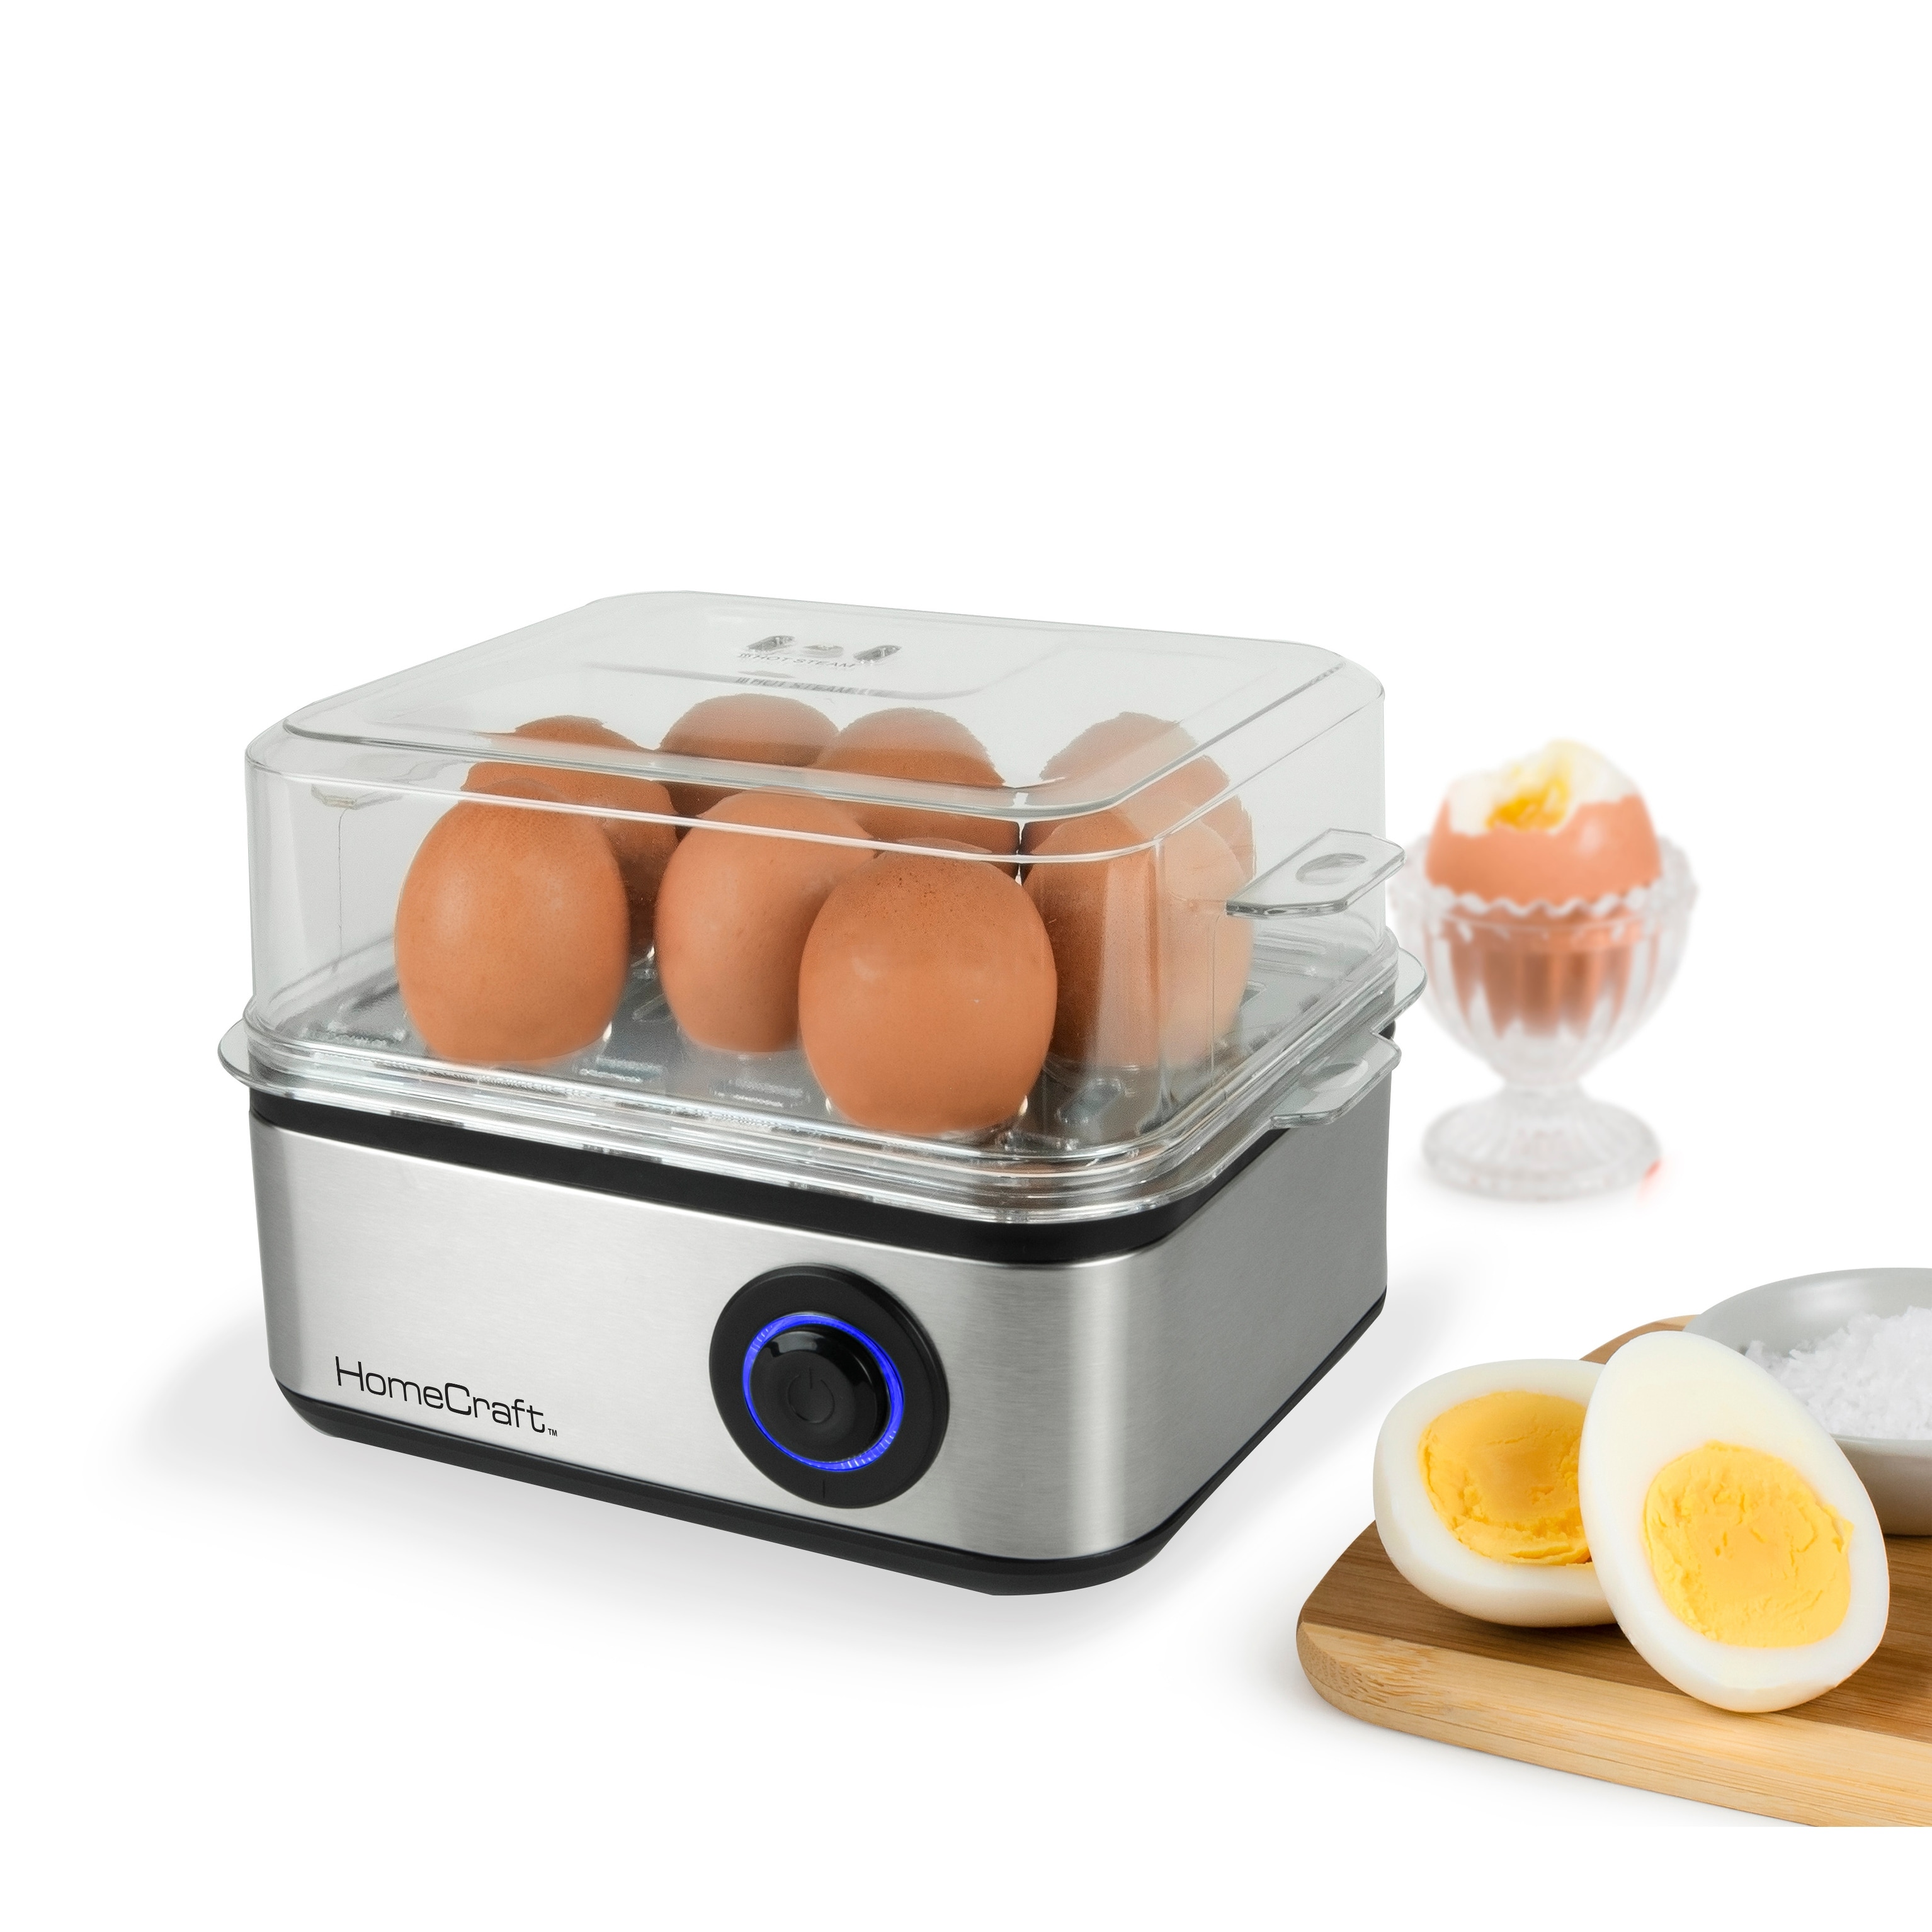 Egg Cookers - Bed Bath & Beyond